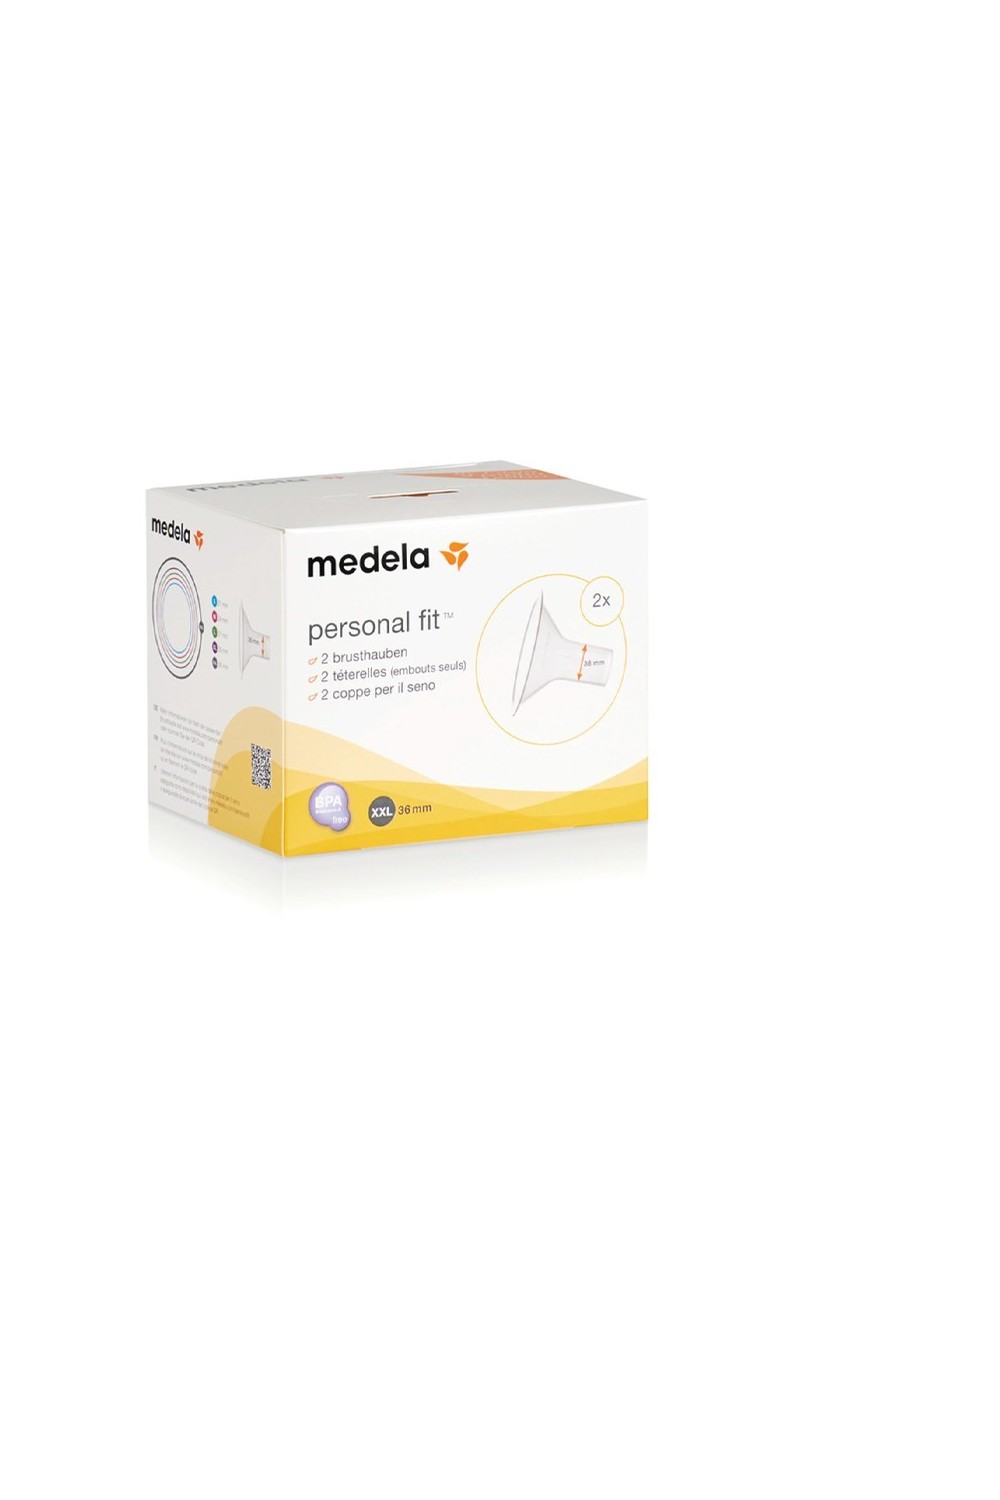 Medela Personal Fit Funnel Size XXL 36